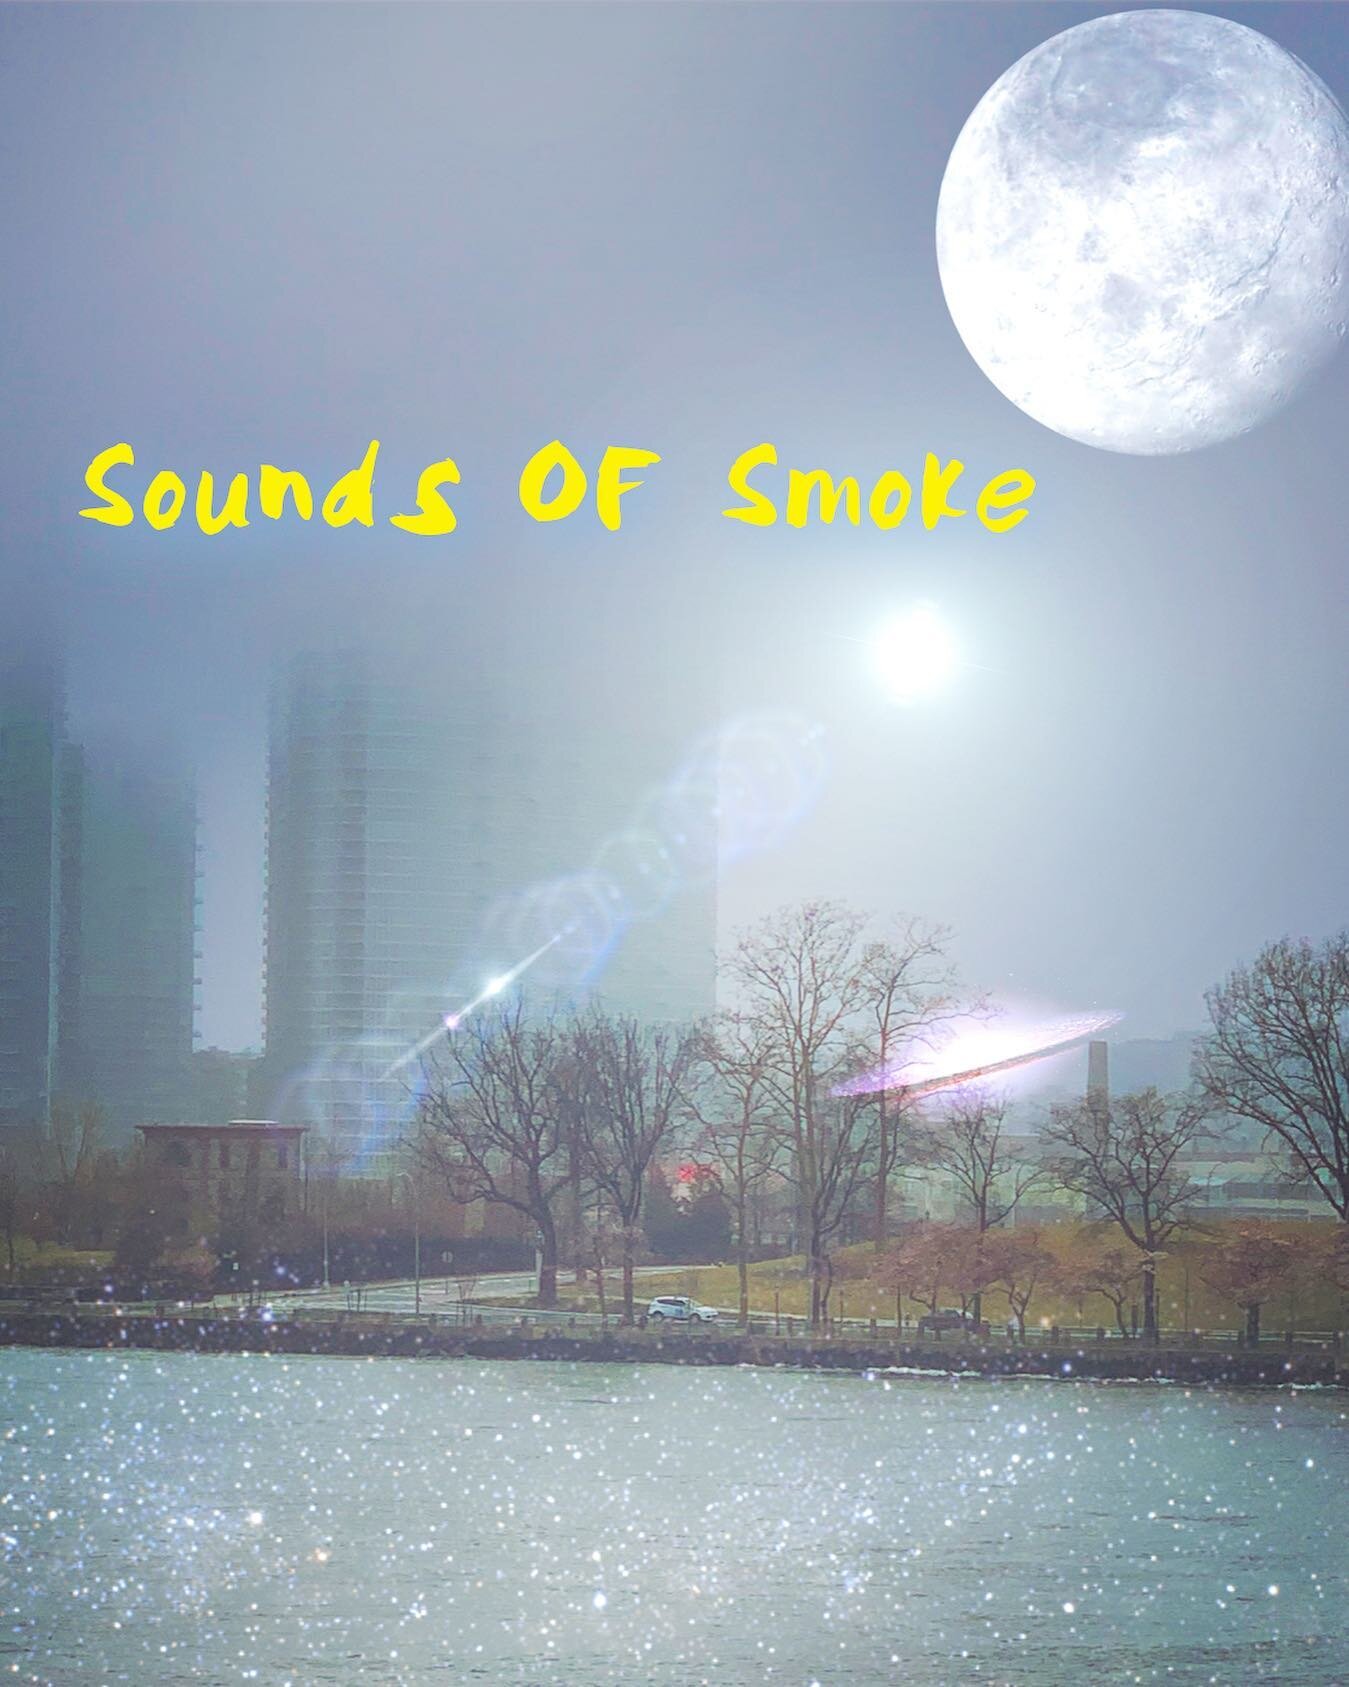 Strange times call for strange podcast- have you checked out Sounds of Smoke yet, we are in season 2!! #podcast #soundsofsmoke